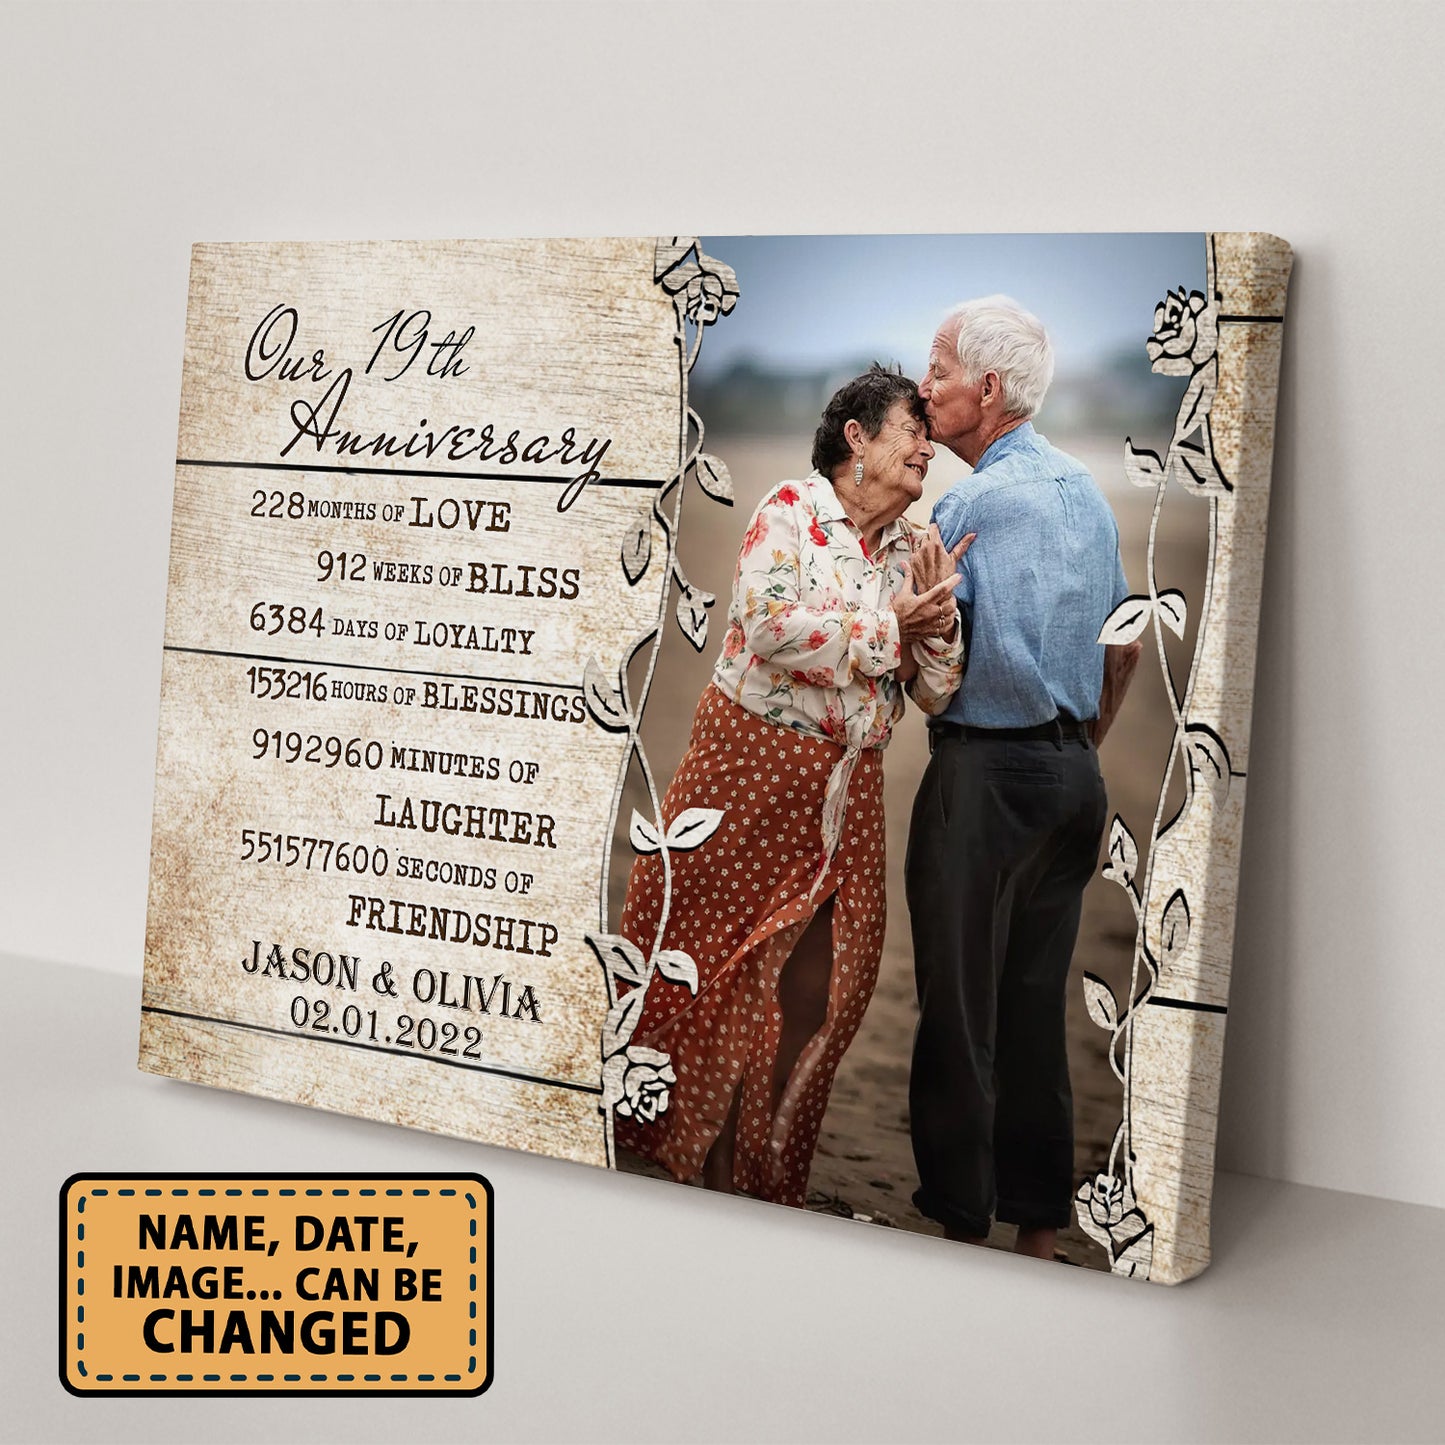 Our 19th Anniversary Timeless love Valentine Gift Personalized Canvas